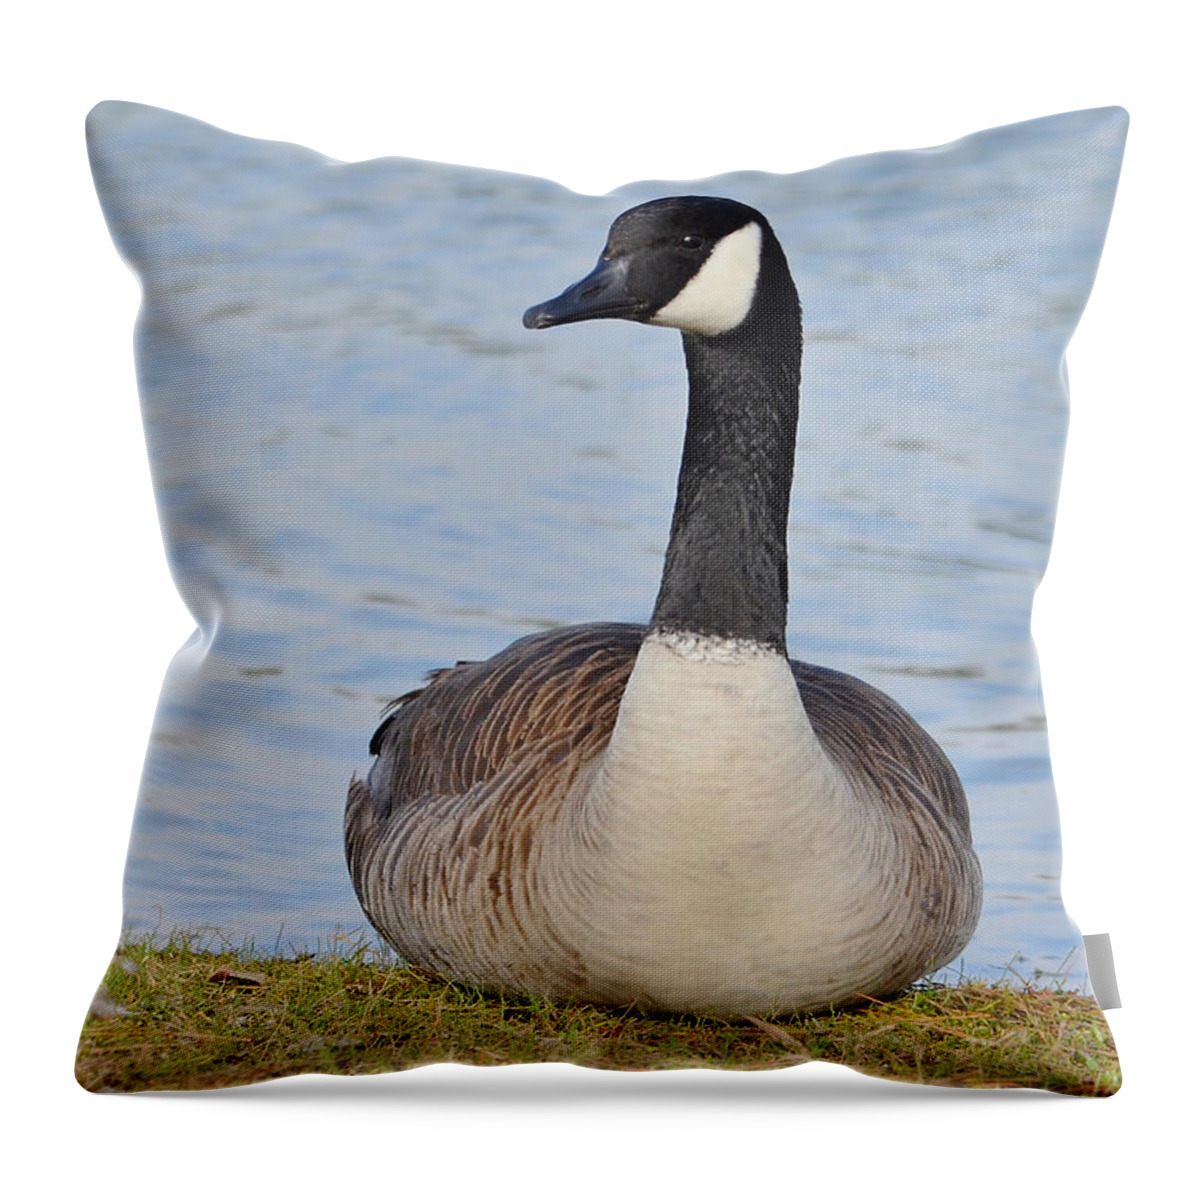 Goose Throw Pillow featuring the photograph Canada Goose Resting By The Lake by Kathy Baccari